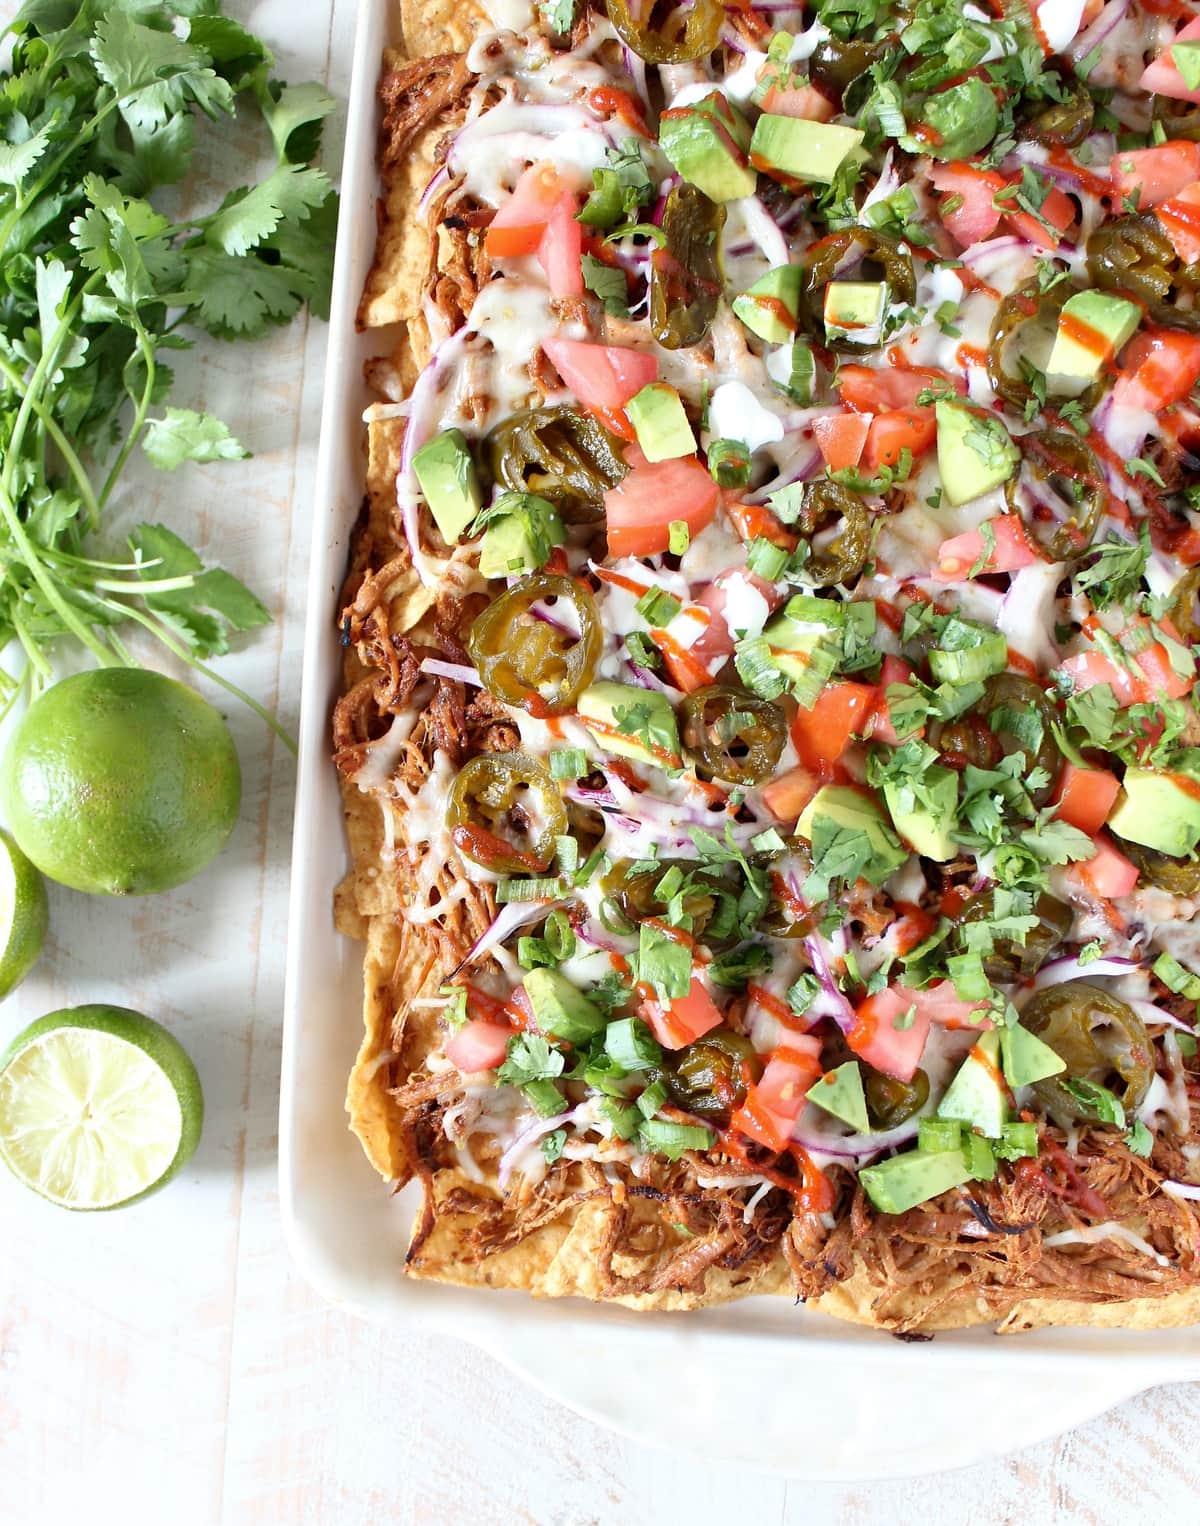 Pulled Pork Nachos with Pepper Jack Cheese - WhitneyBond.com